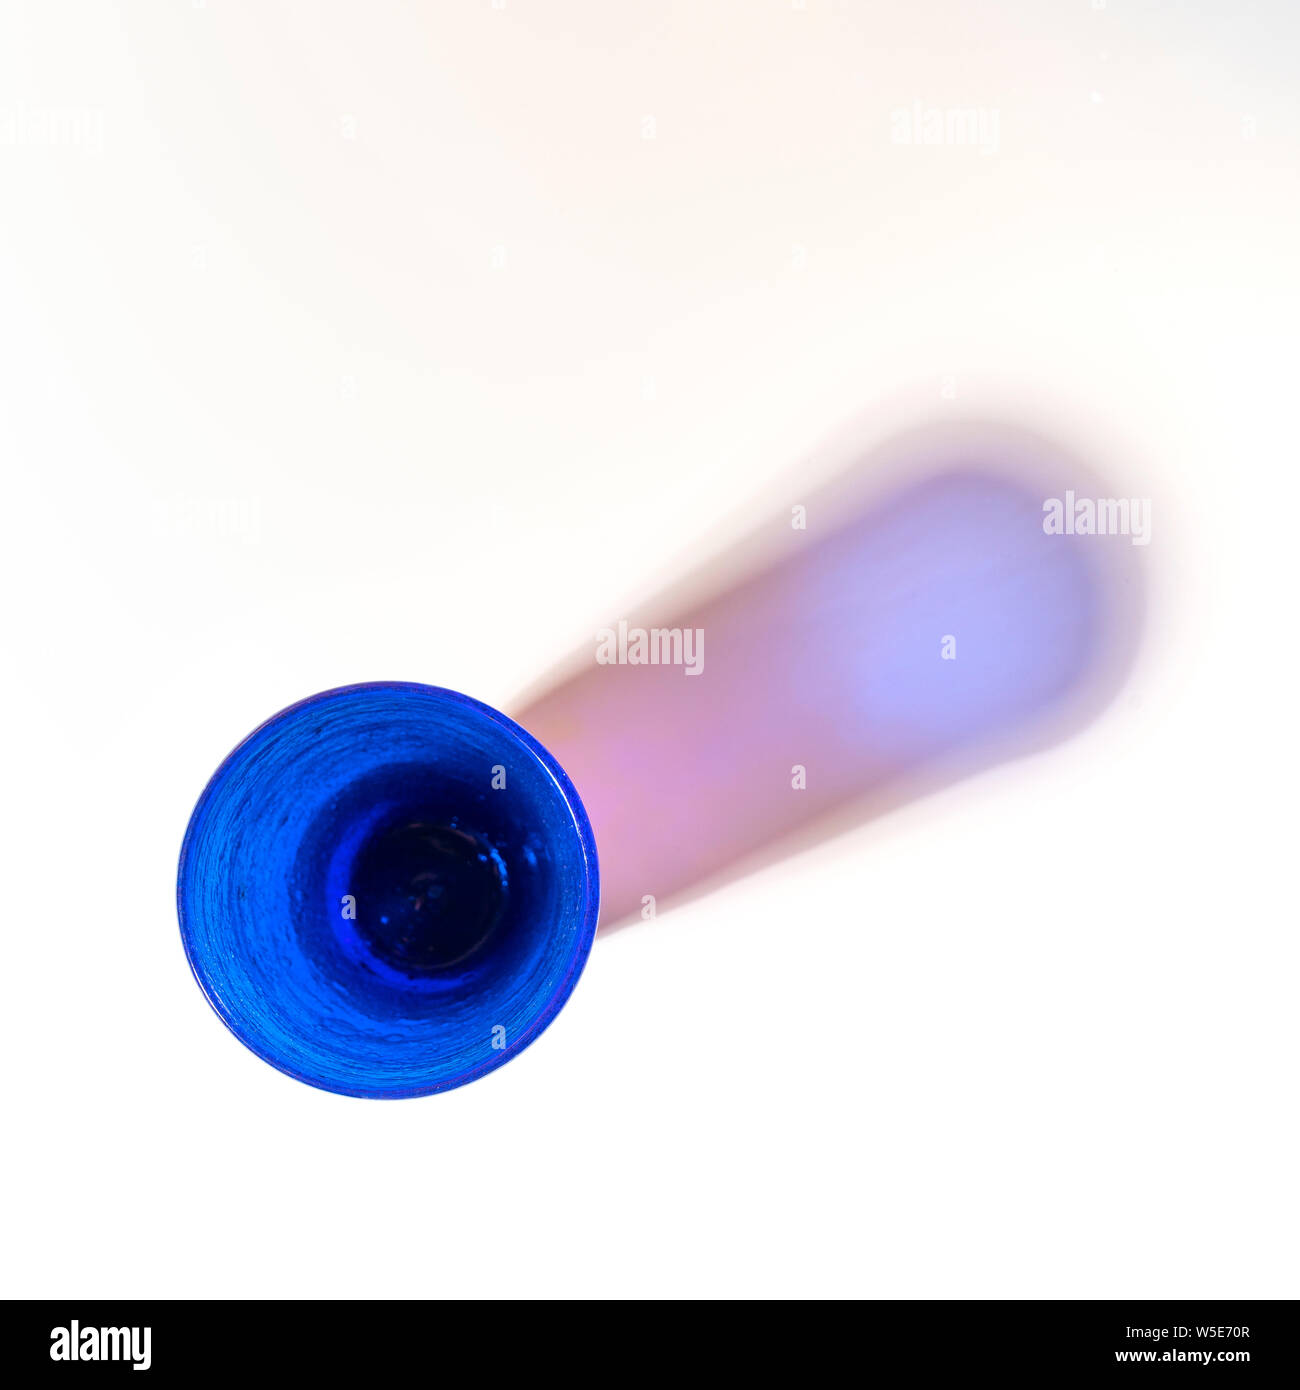 Some blue glasses on a white surface Stock Photo